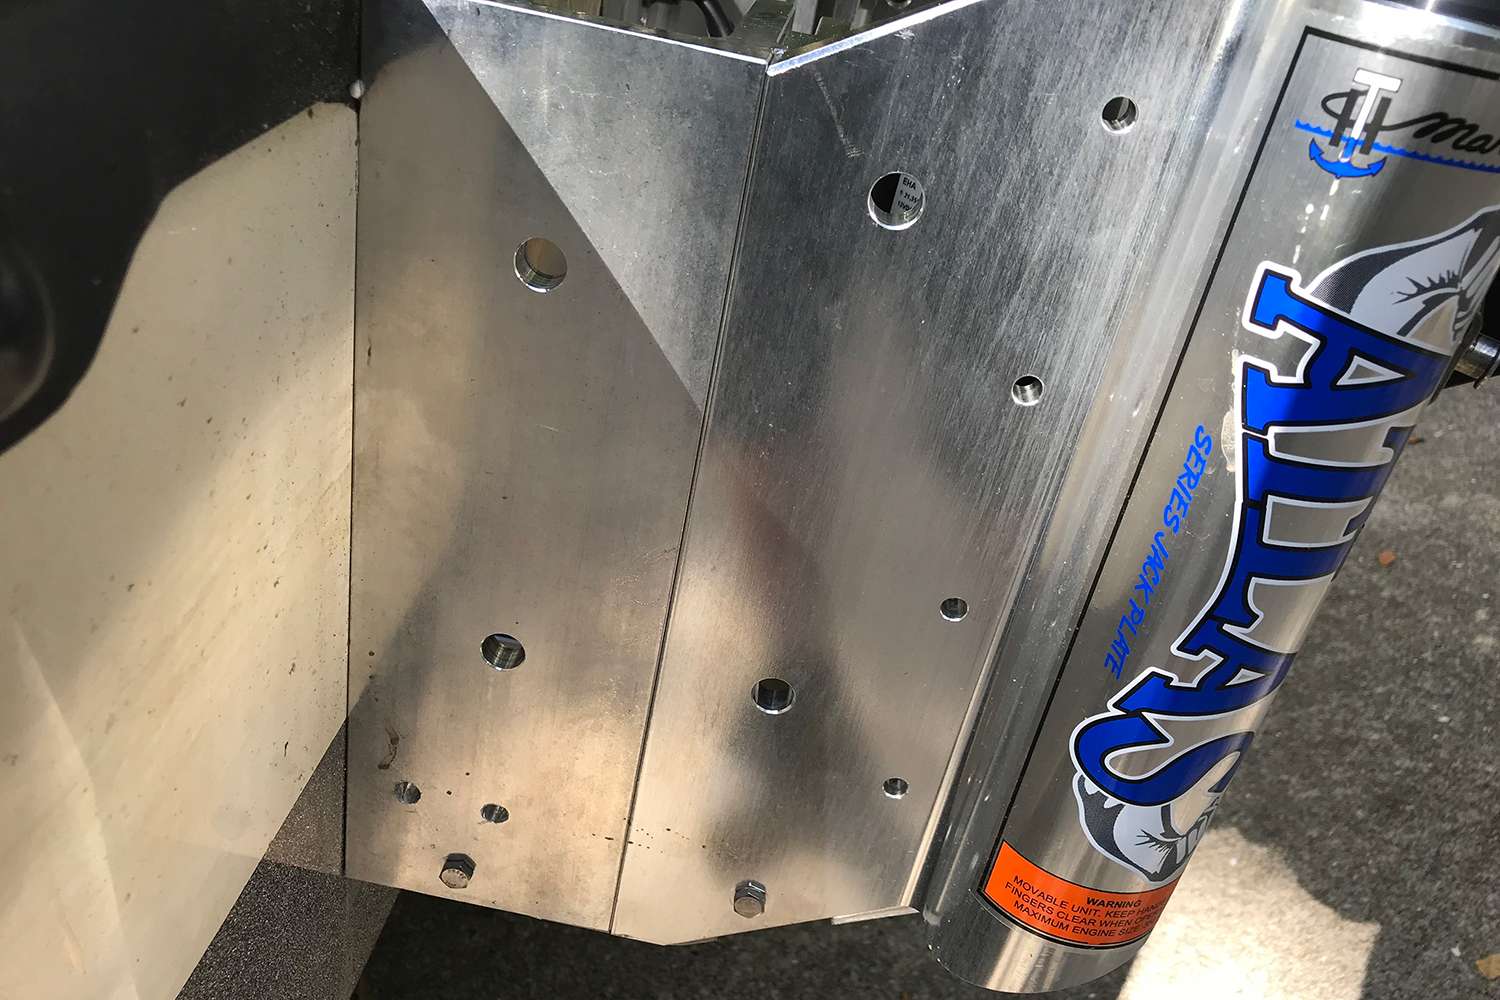 Here are your options. Depending on the boat, you can rig your mounting brackets to the front or rear of the Atlas jackplate. Ideally, you'll want the Talons as far forward as possible to accommodate the weight distribution. 